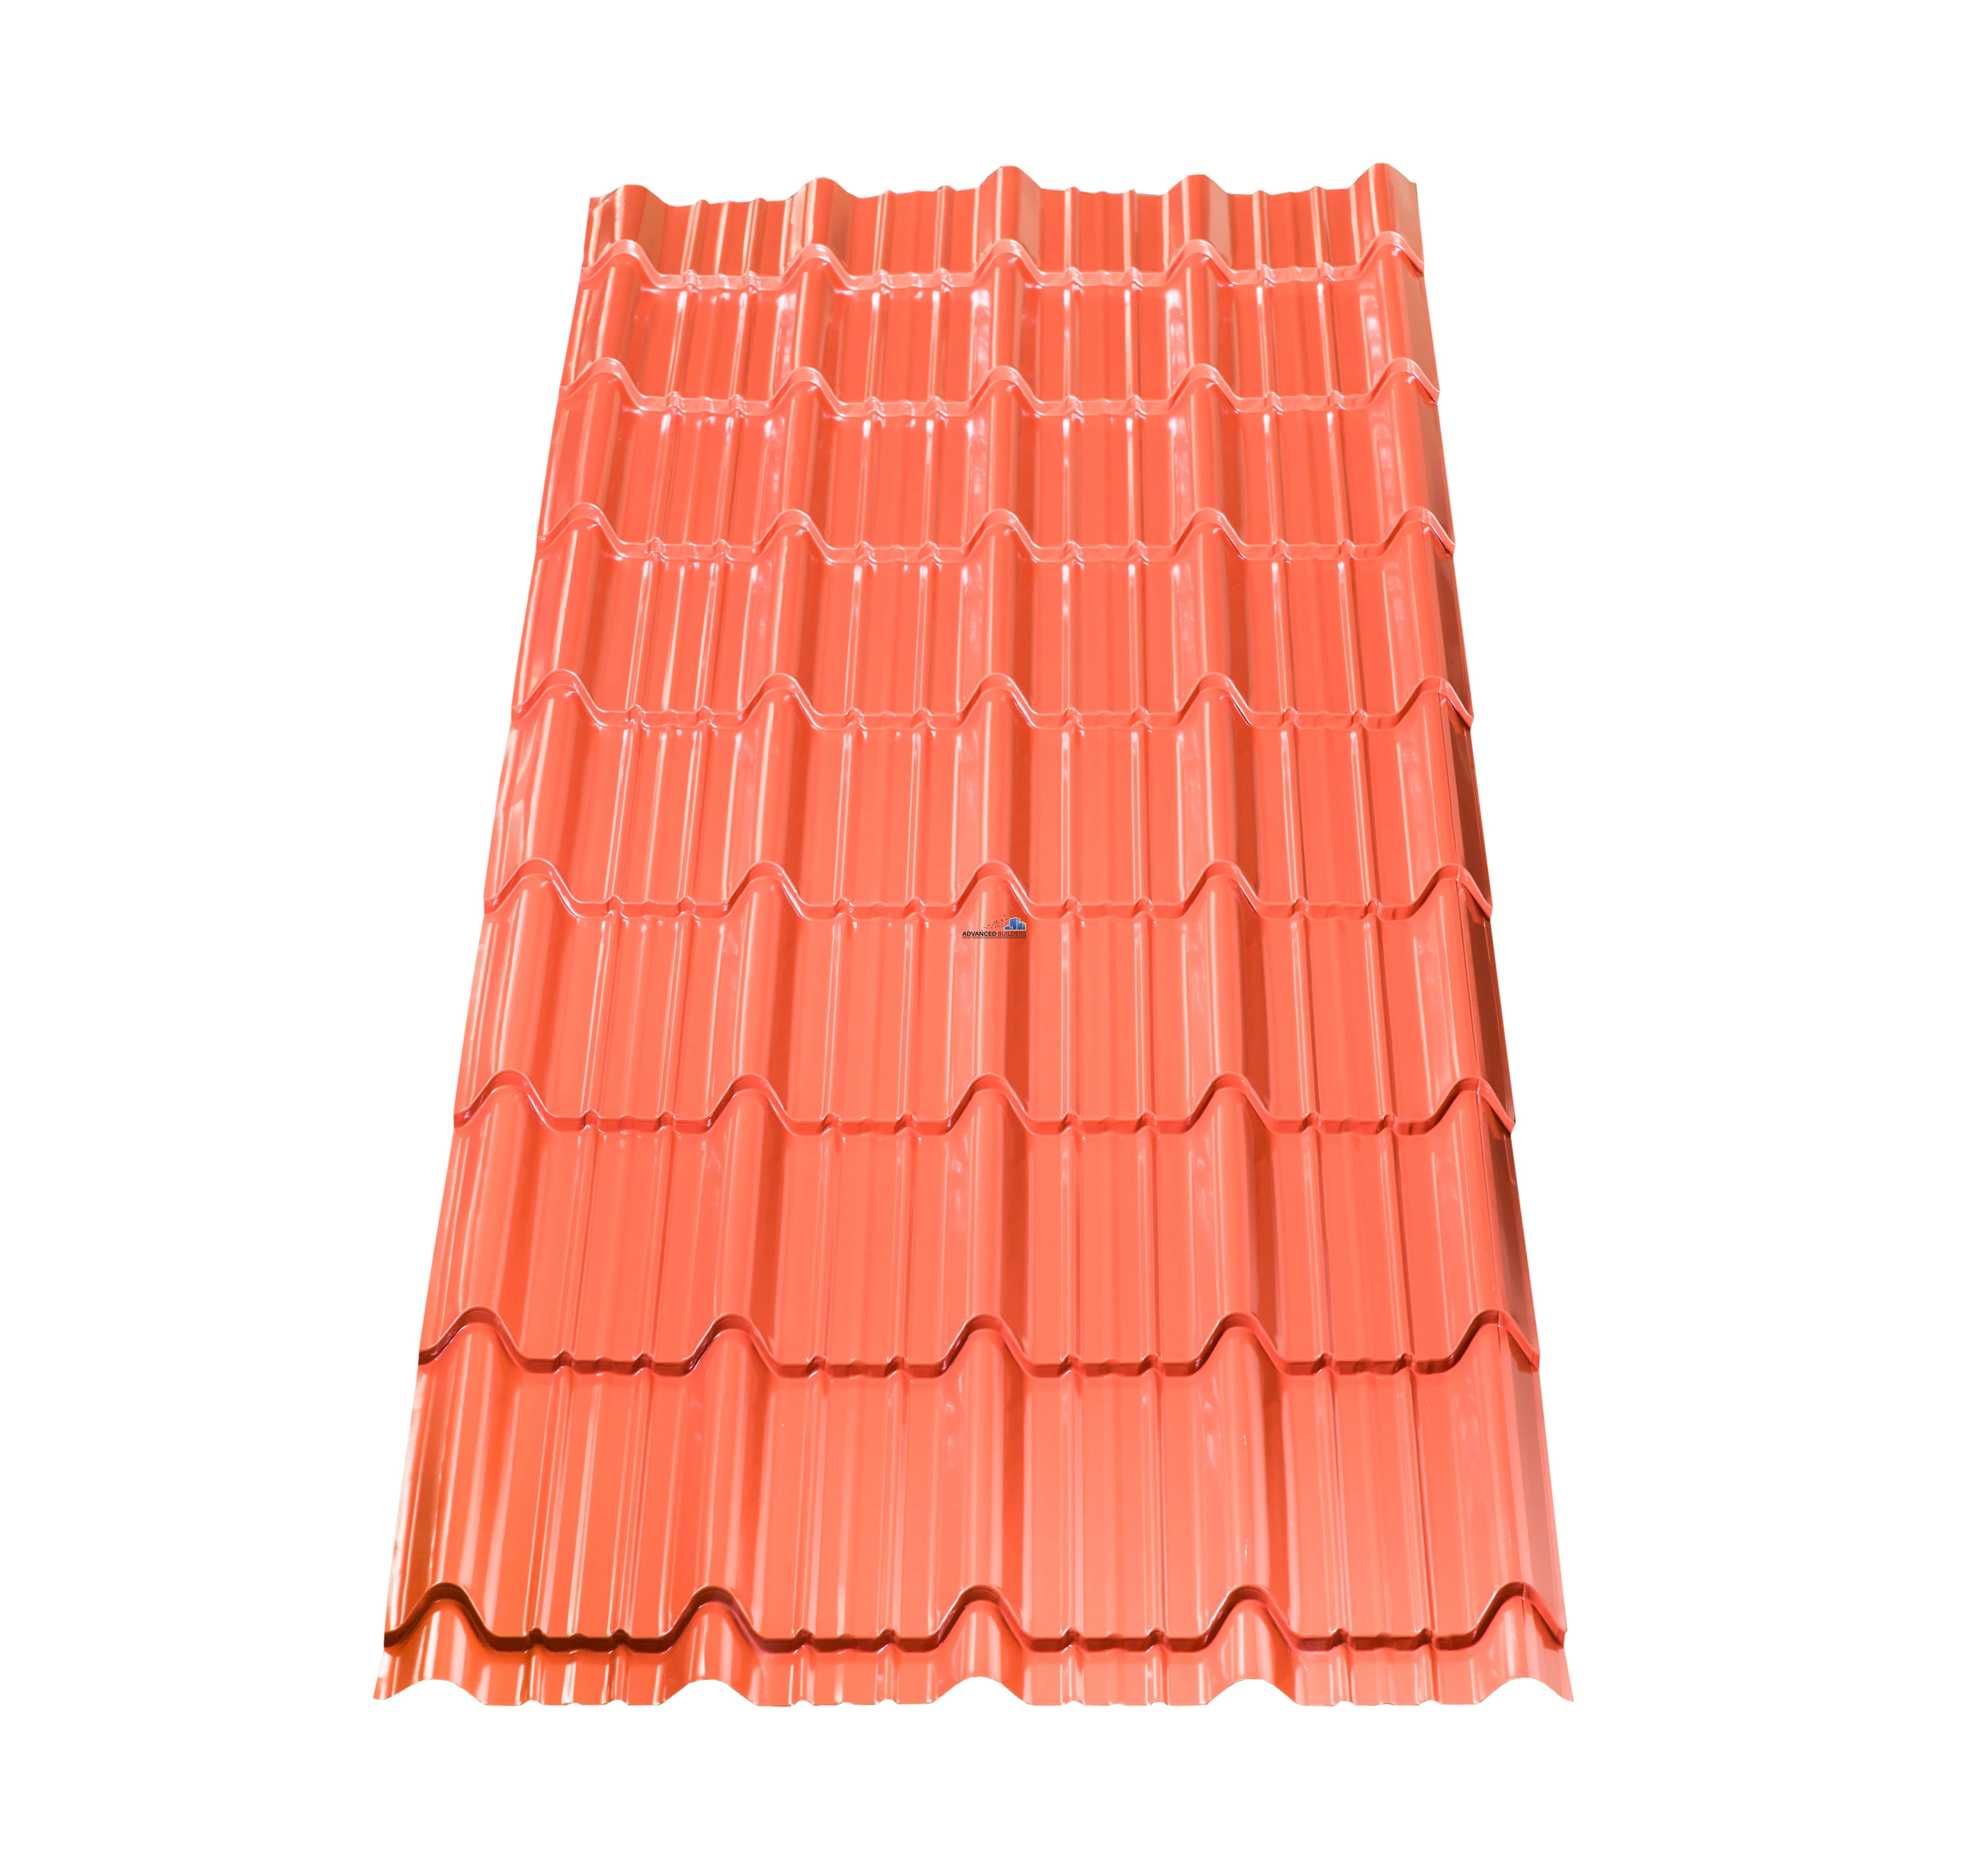 Top Roof Dura Tile 0.32mm Red